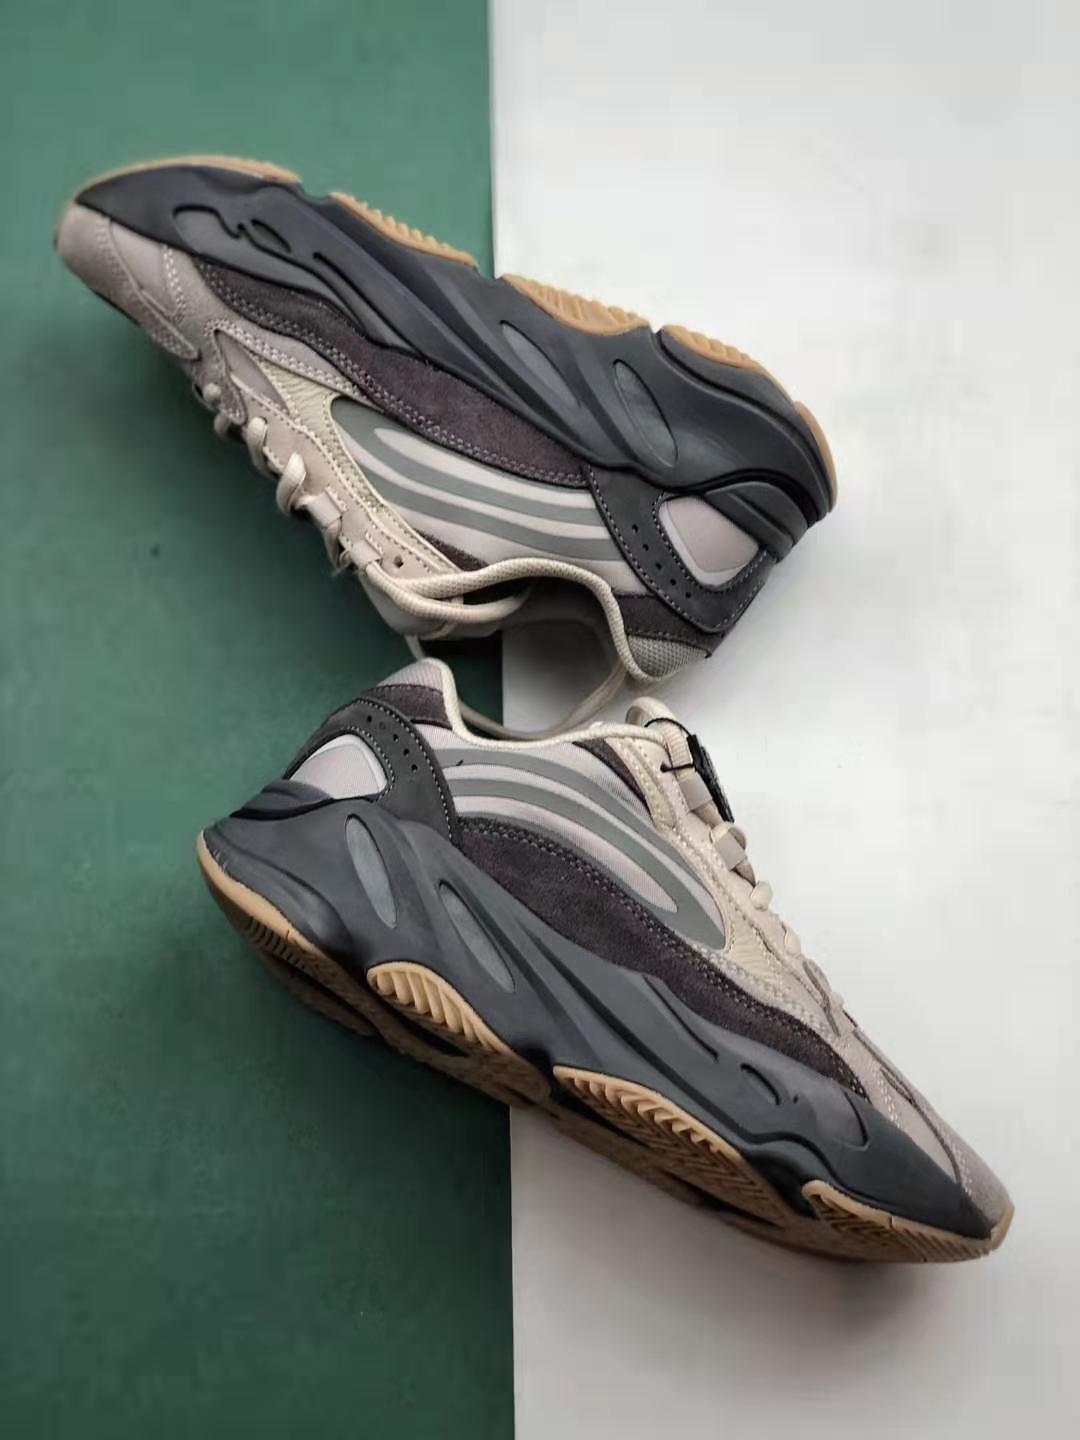 Adidas Yeezy Boost 700 V2 Tephra FU7914 - Premium Sneakers for Unmatched Style